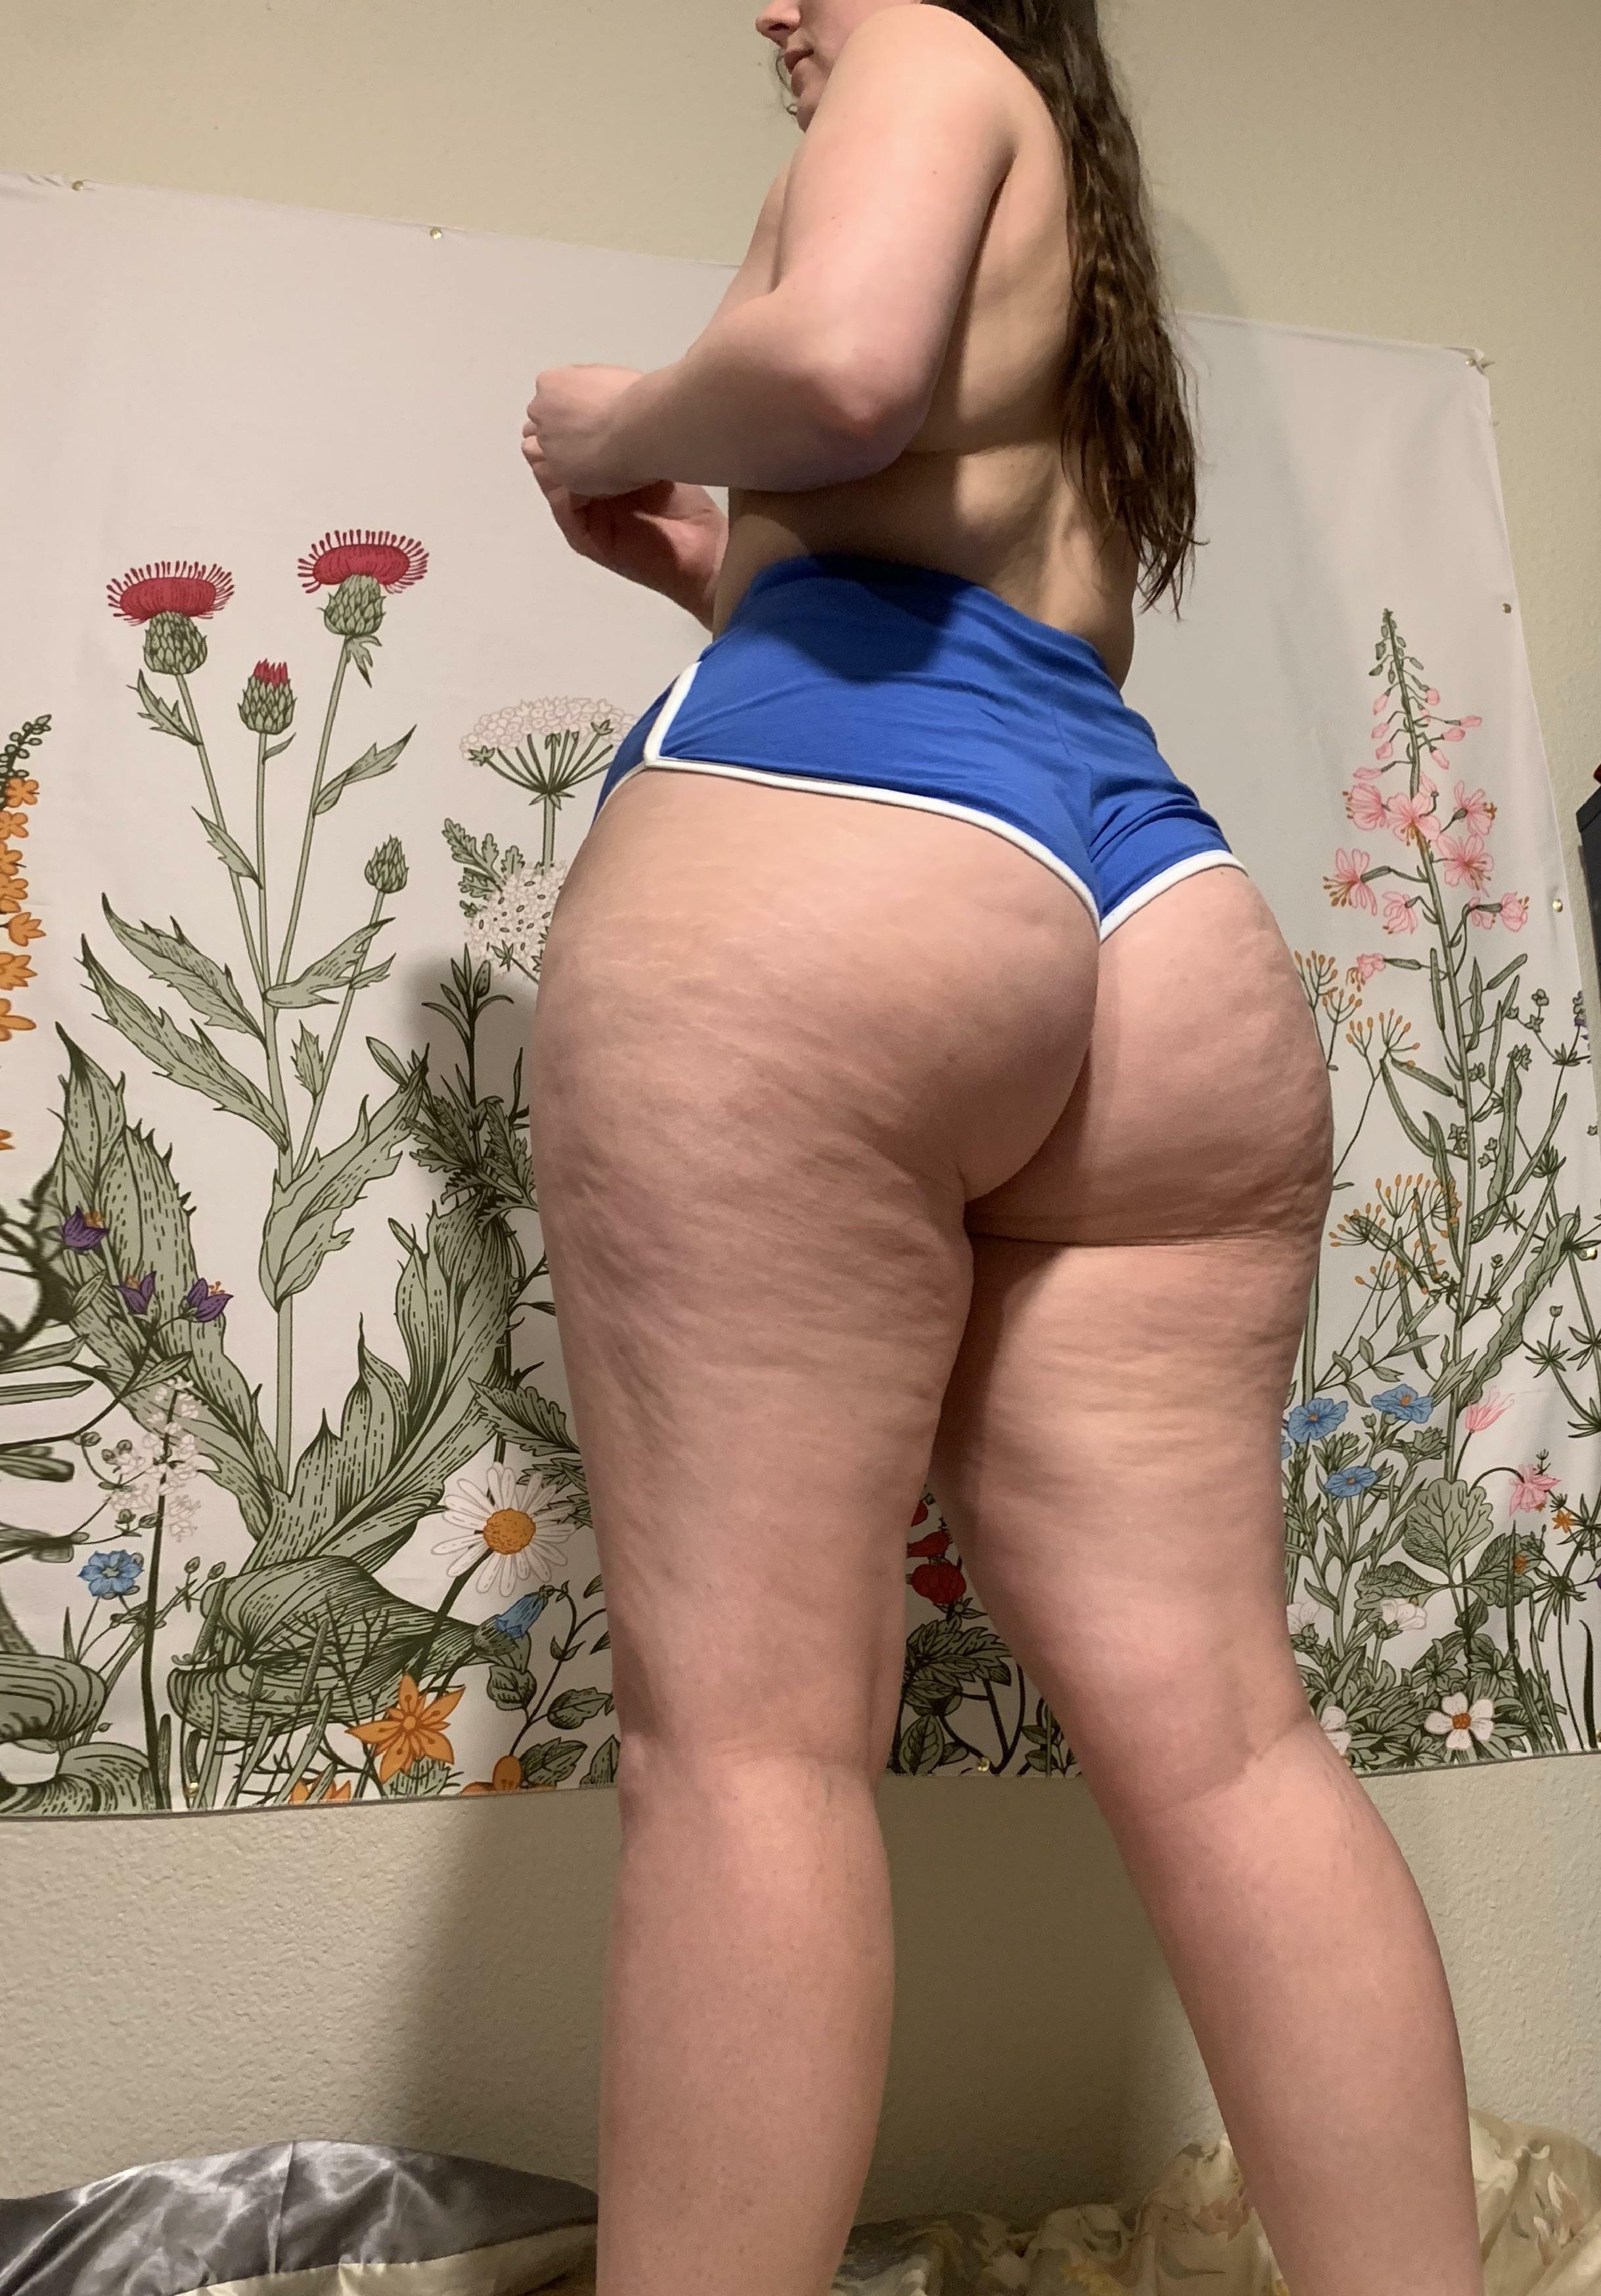 Thick Leg Porn Mexican - If my big ass and thick thighs made you slow your roll then you made my  night, let me know how I can make yours ? Curves - 2437x3495